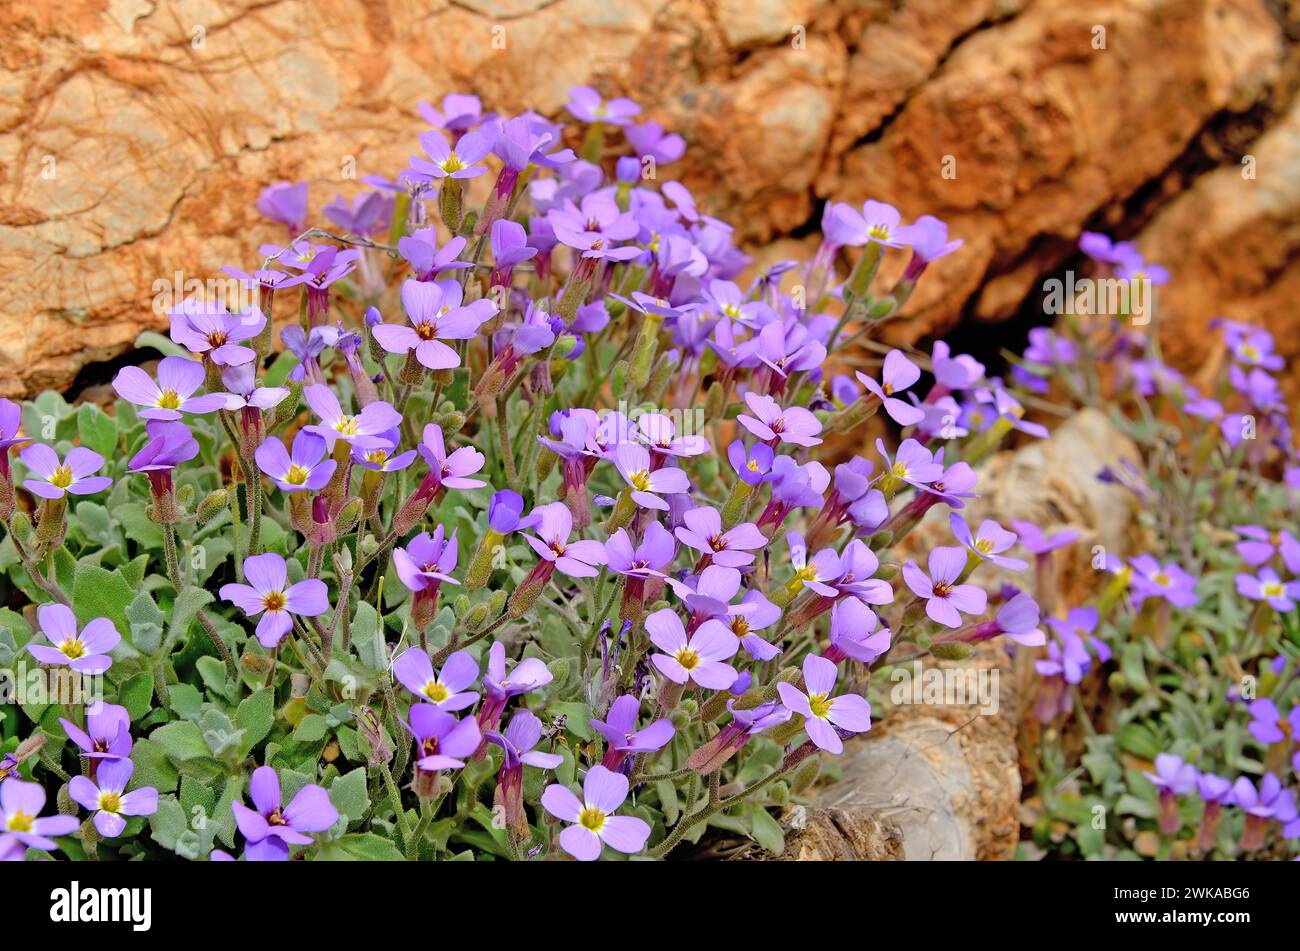 Purple flowers of Aubrieta pinardii in the natural environment in spring. Stock Photo